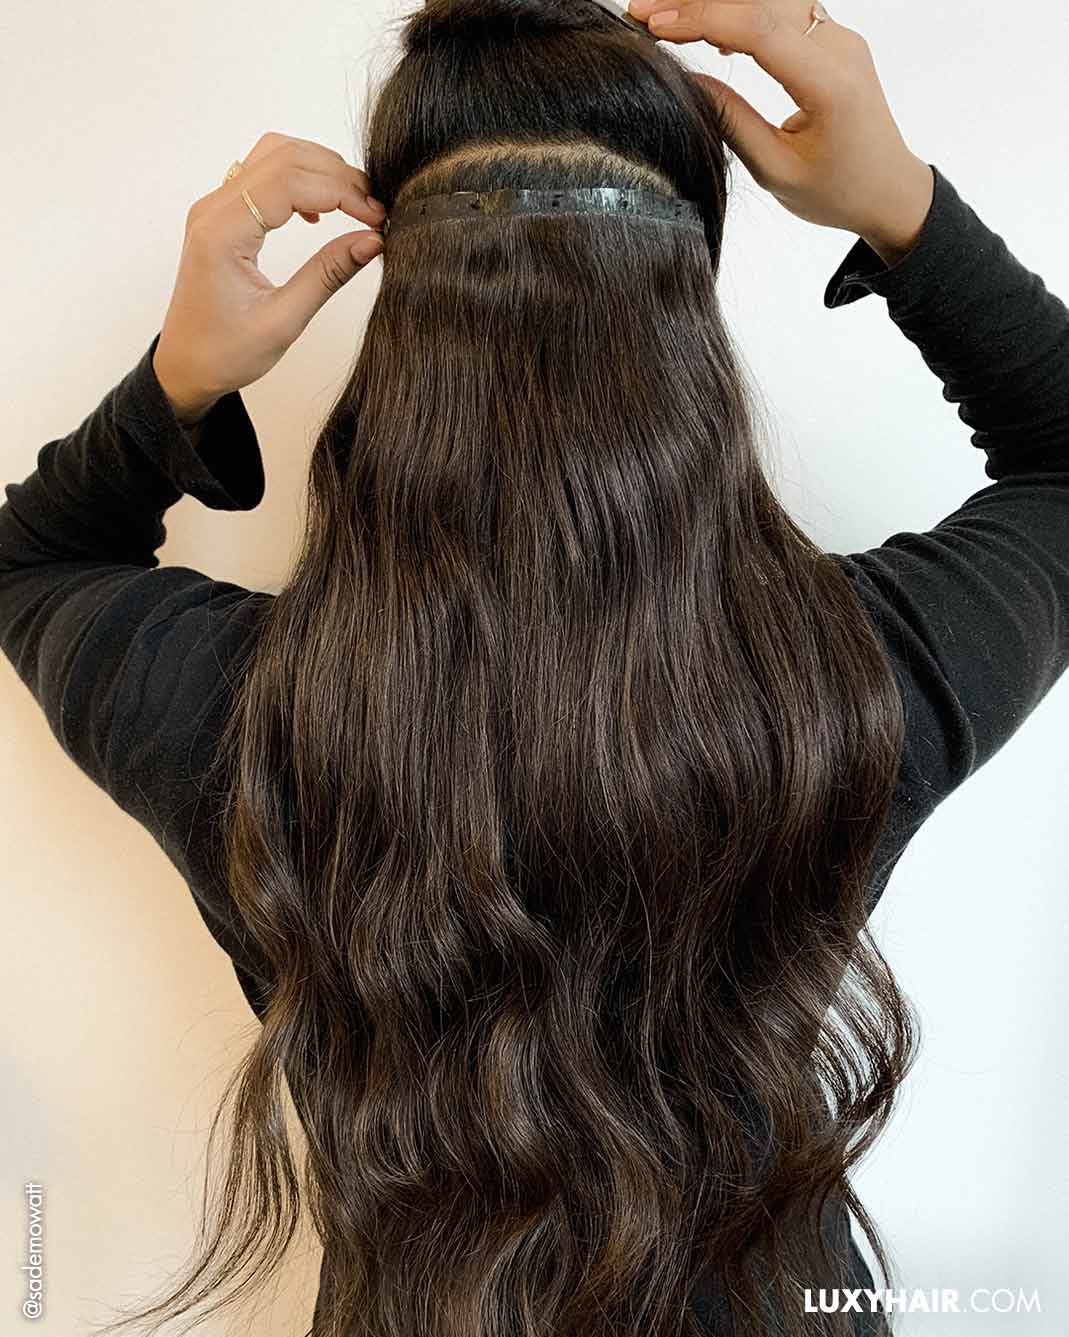 Hair extensions myths and facts